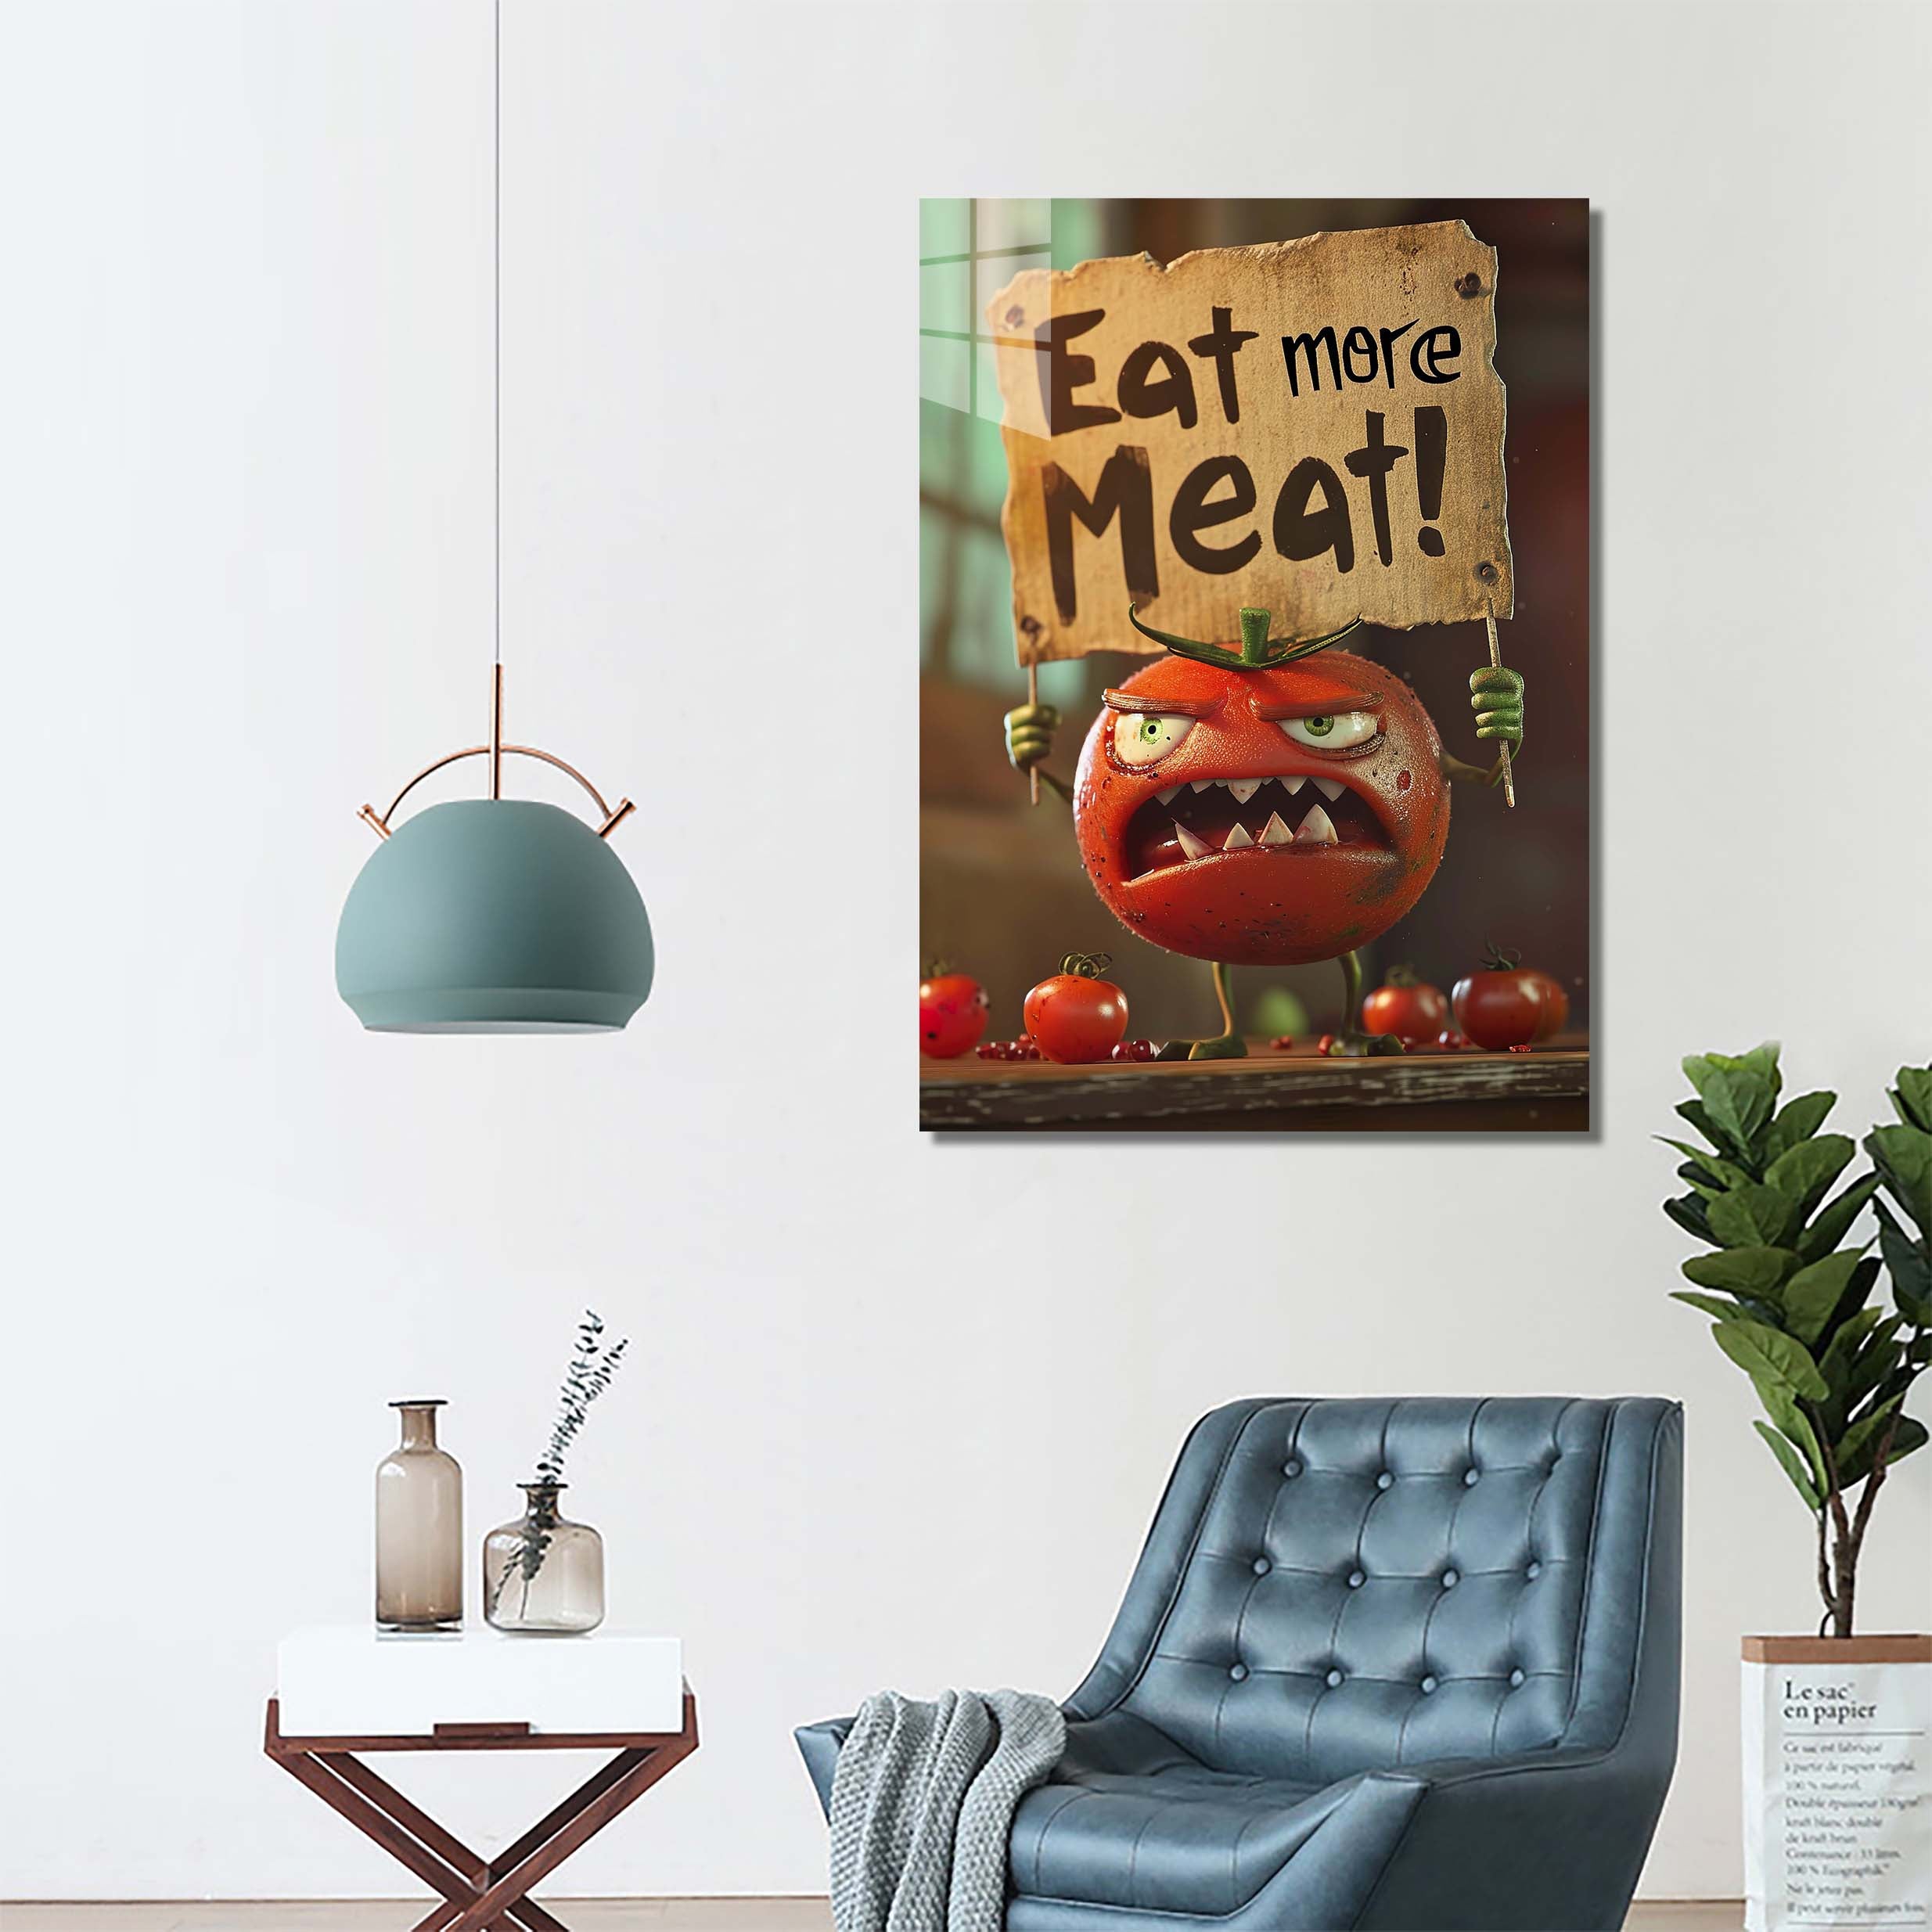 Eat more Meat-designed by @Paragy